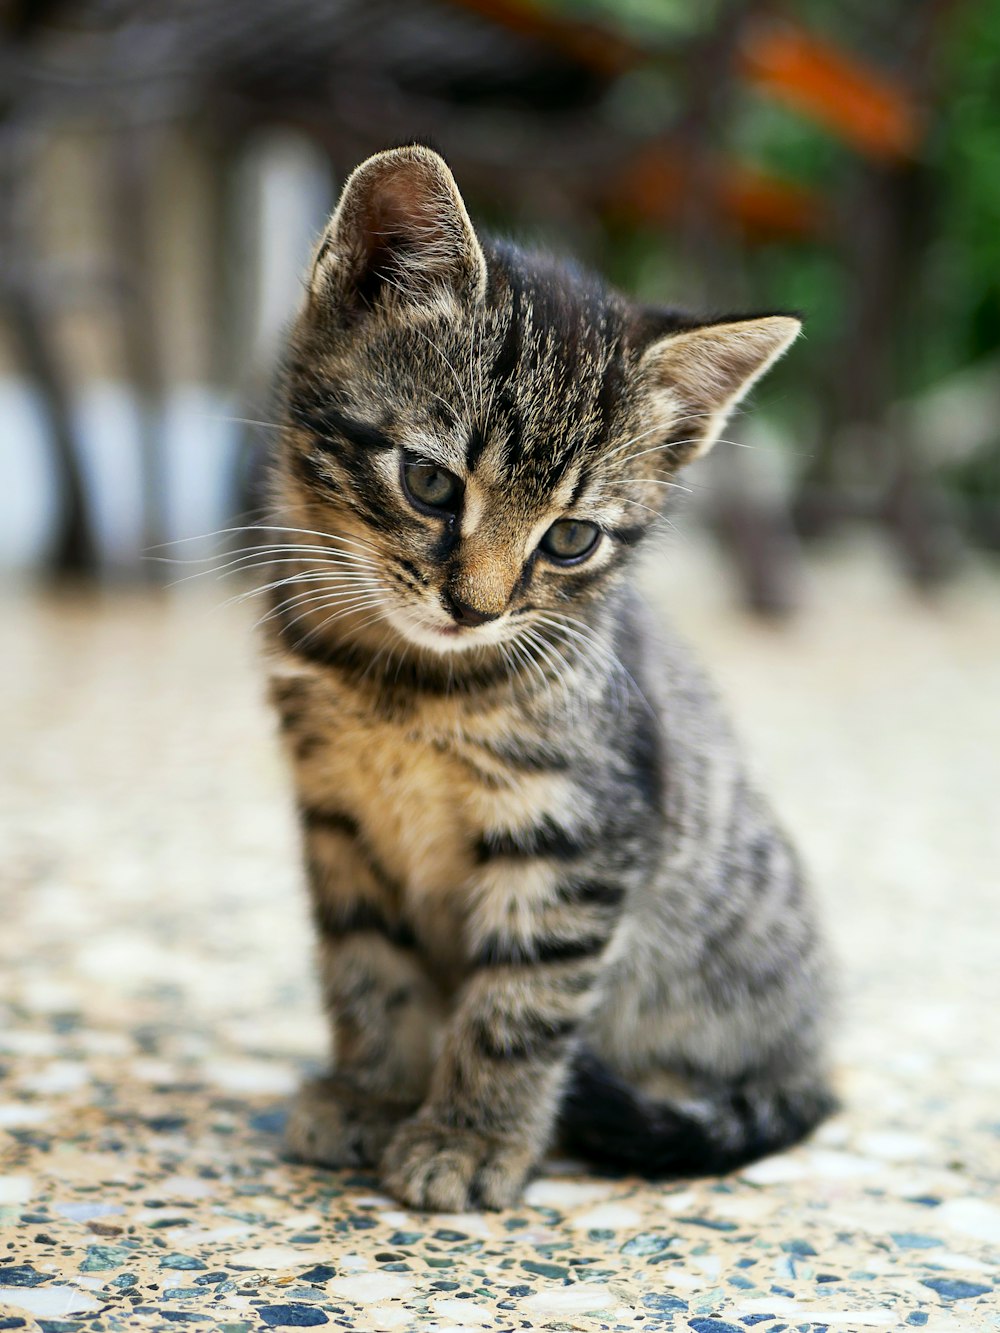 750+ Cute Cat Pictures  Download Free Images on Unsplash